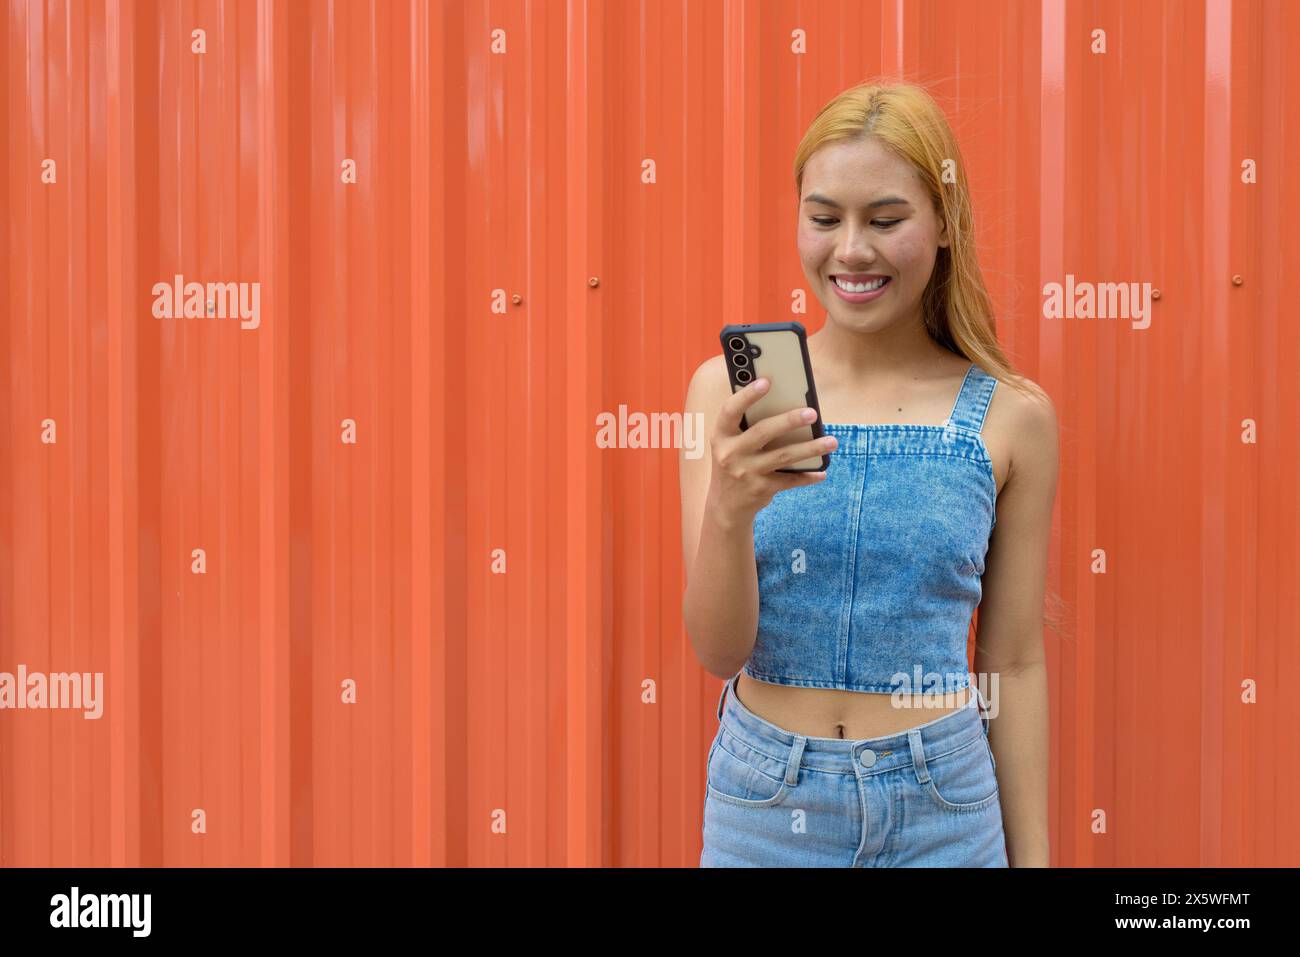 Beautiful Asian girl with blonde hair against orange background Stock Photo